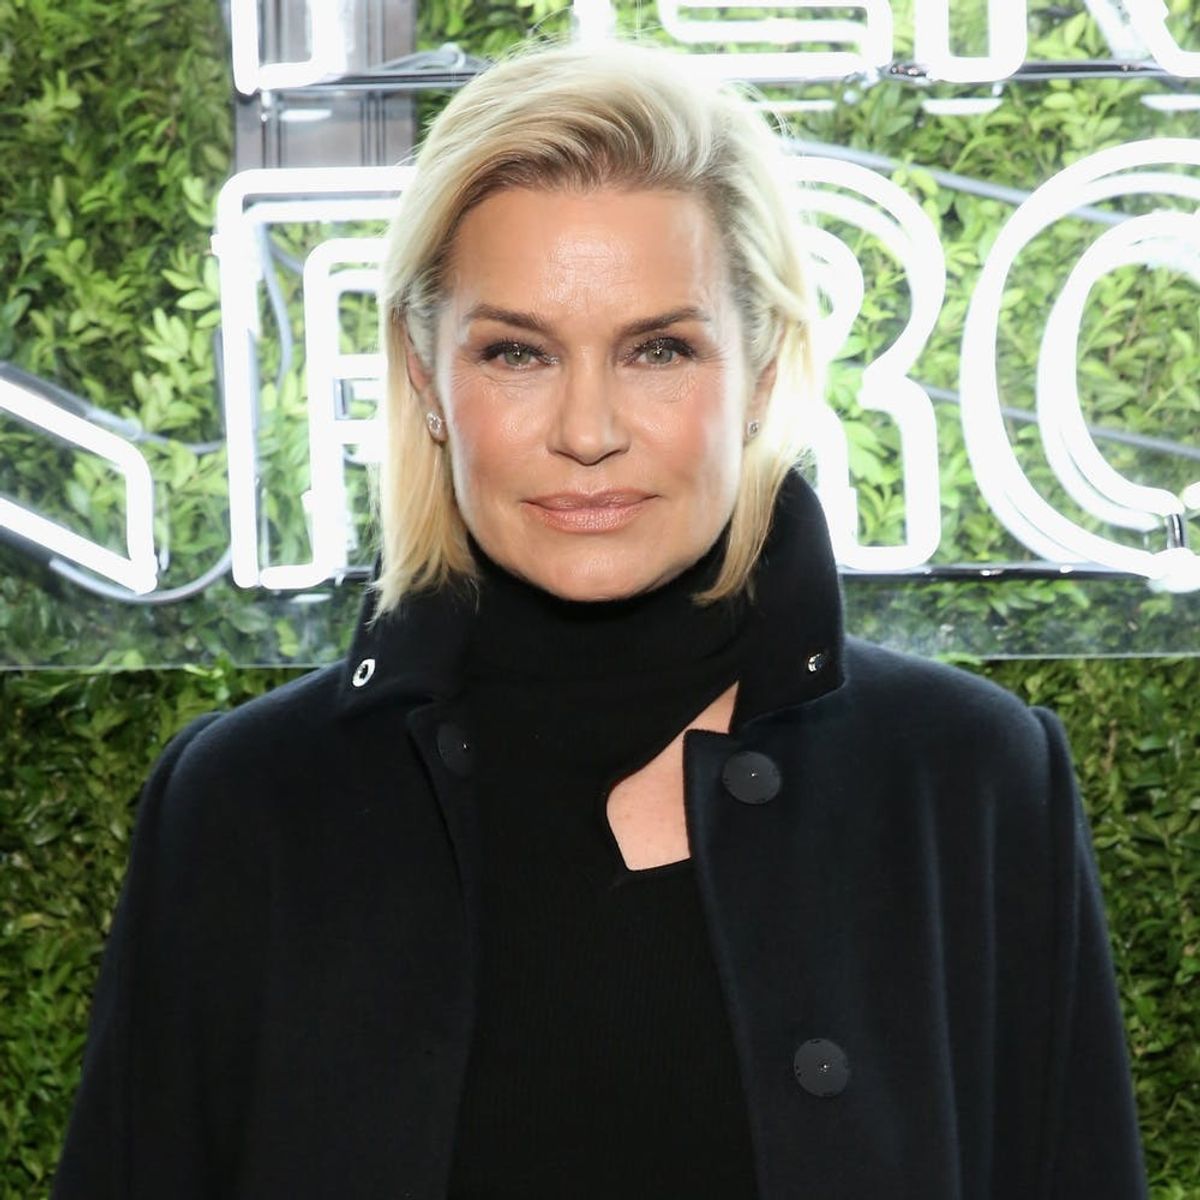 Yolanda Hadid Reveals She’s ‘Very Much in Love’ With a New Man